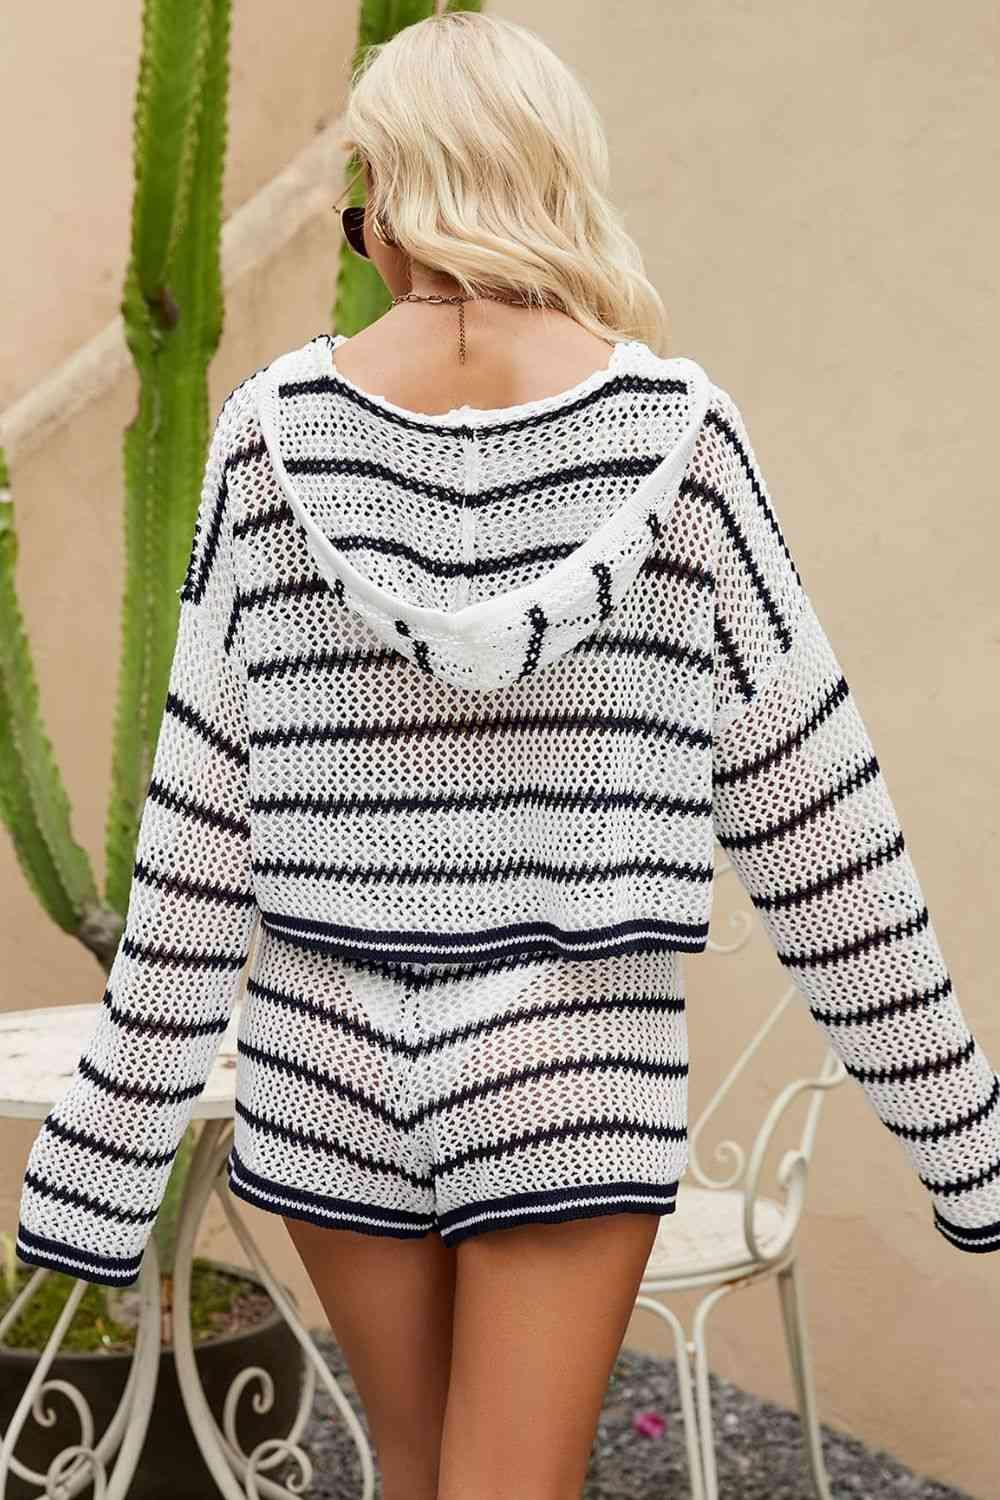 JW Striped Knit Hoodie and Shorts Set - Shop SWR Luxe